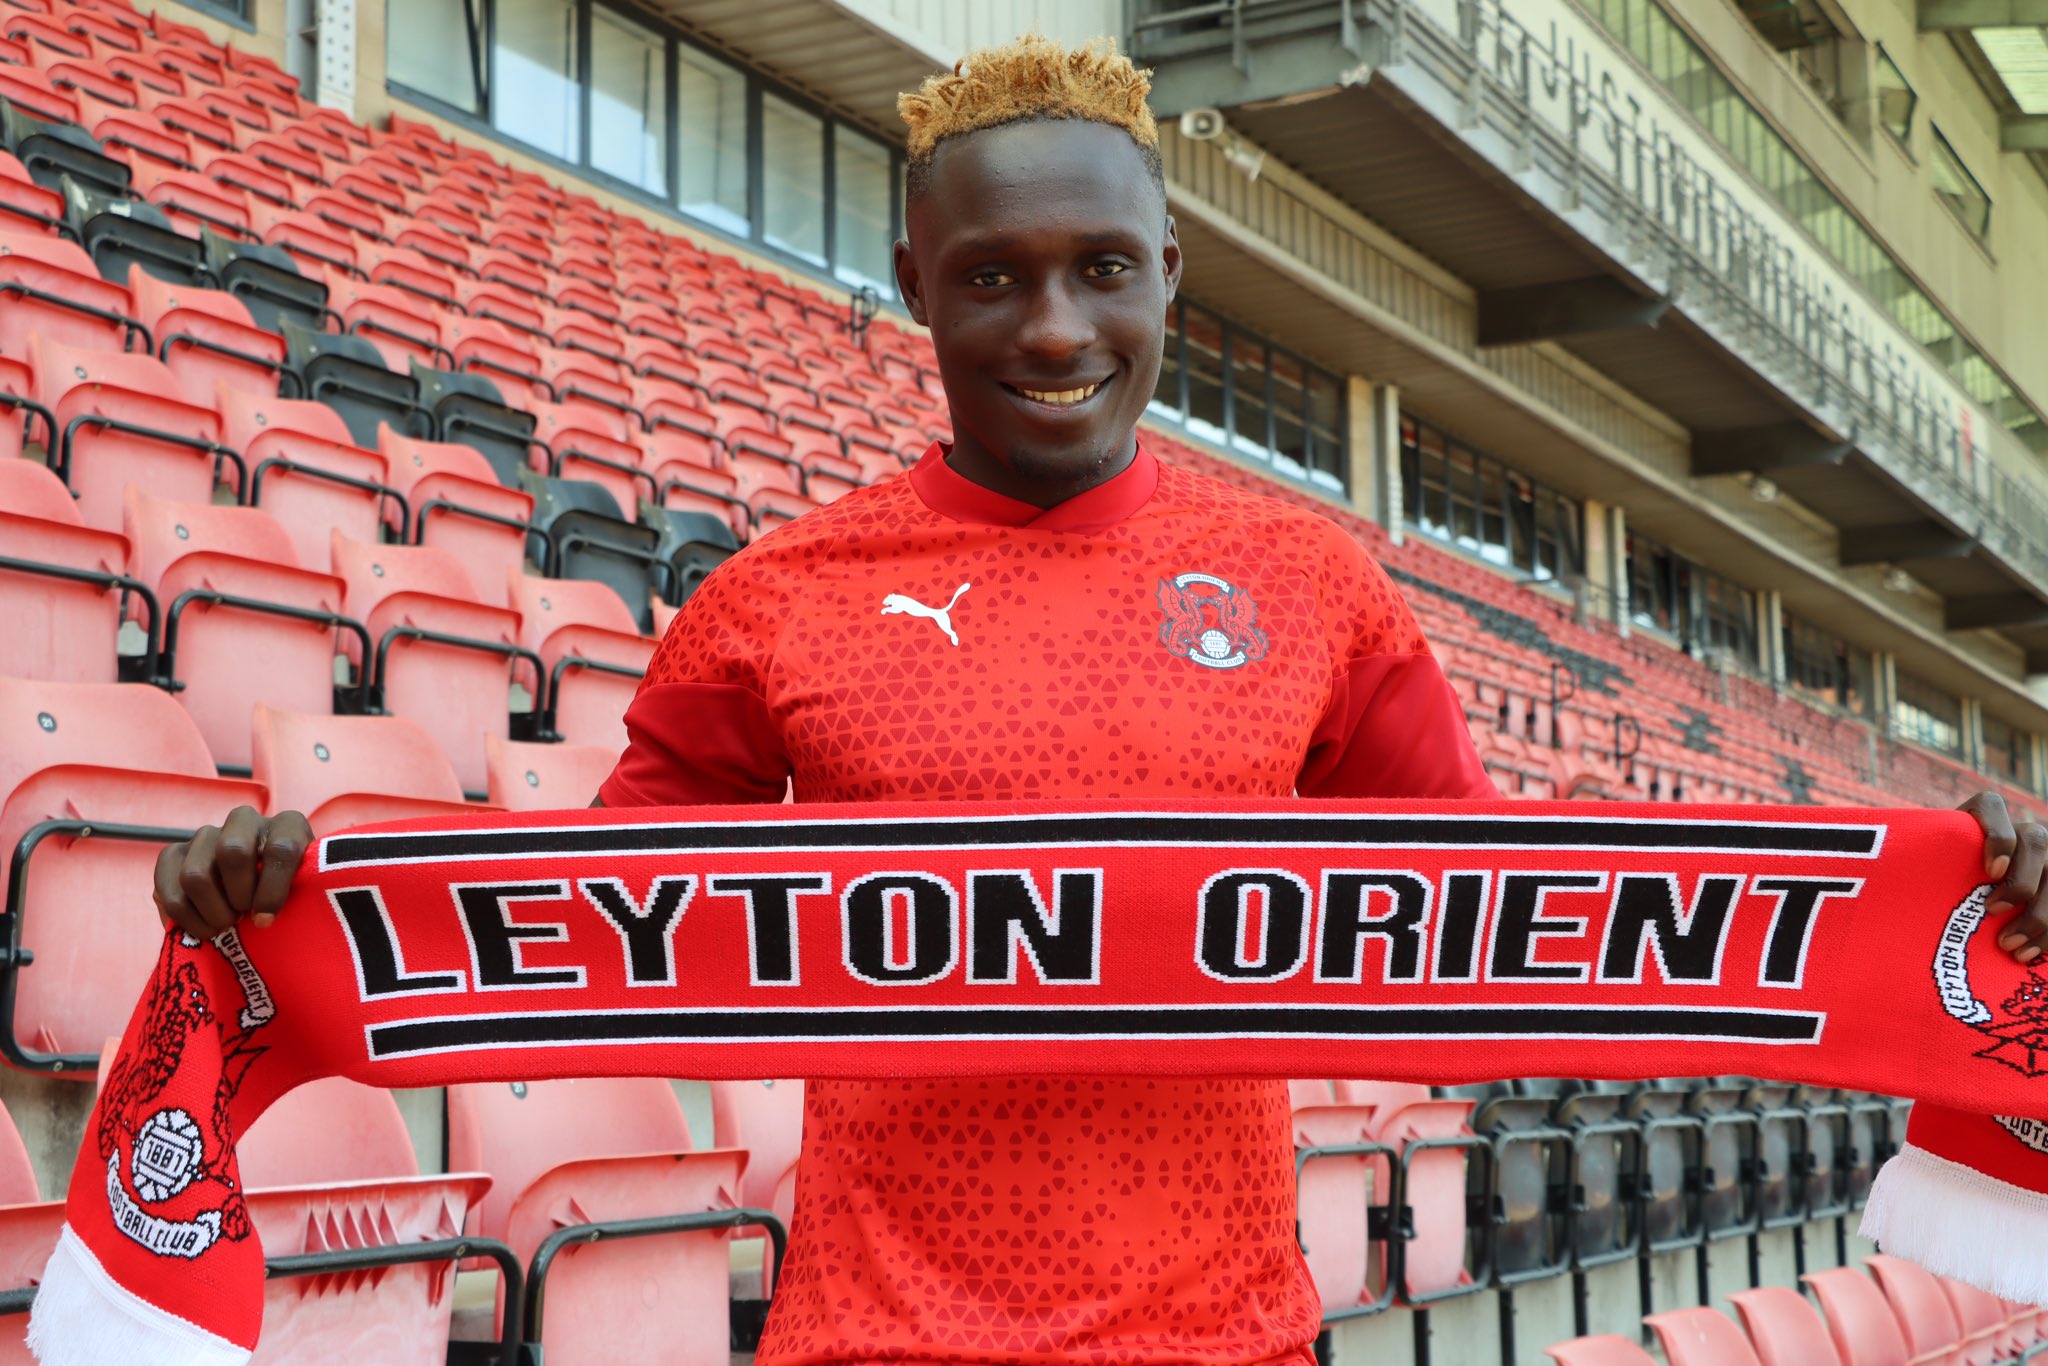 'Leyton Orient fans can expect a livewire on the pitch' - Dan Agyei assures